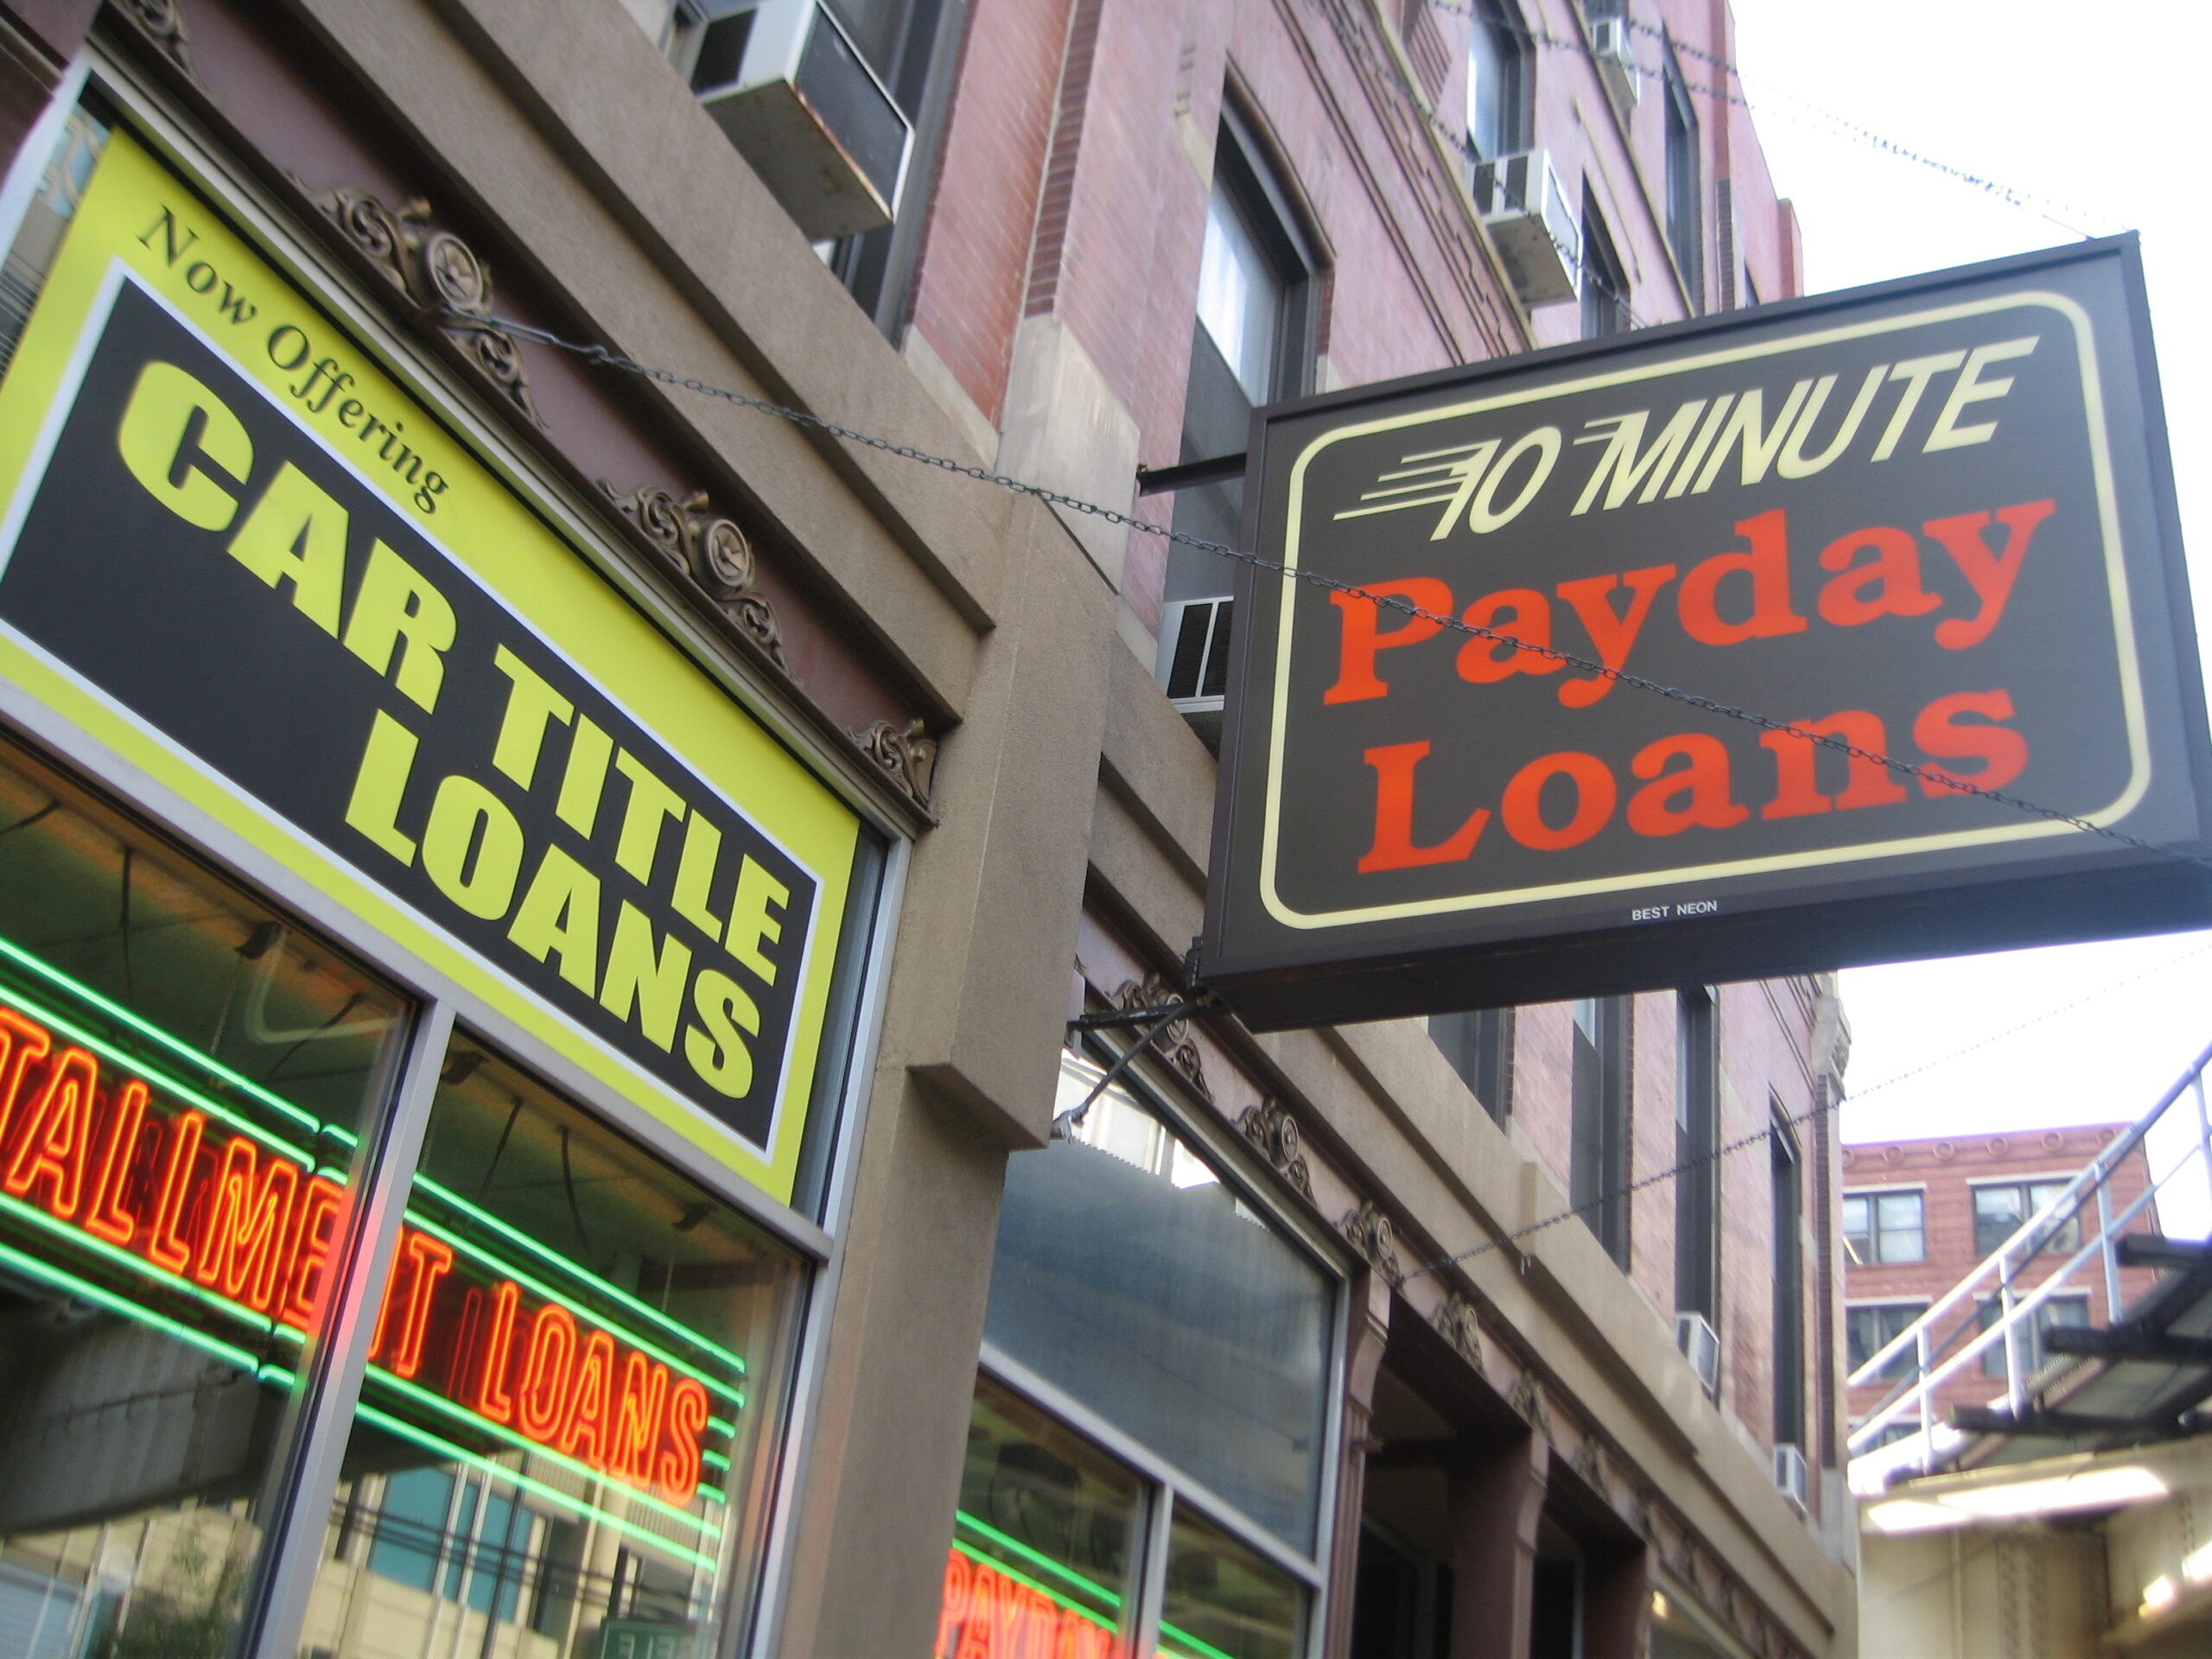 Payday Loans signs